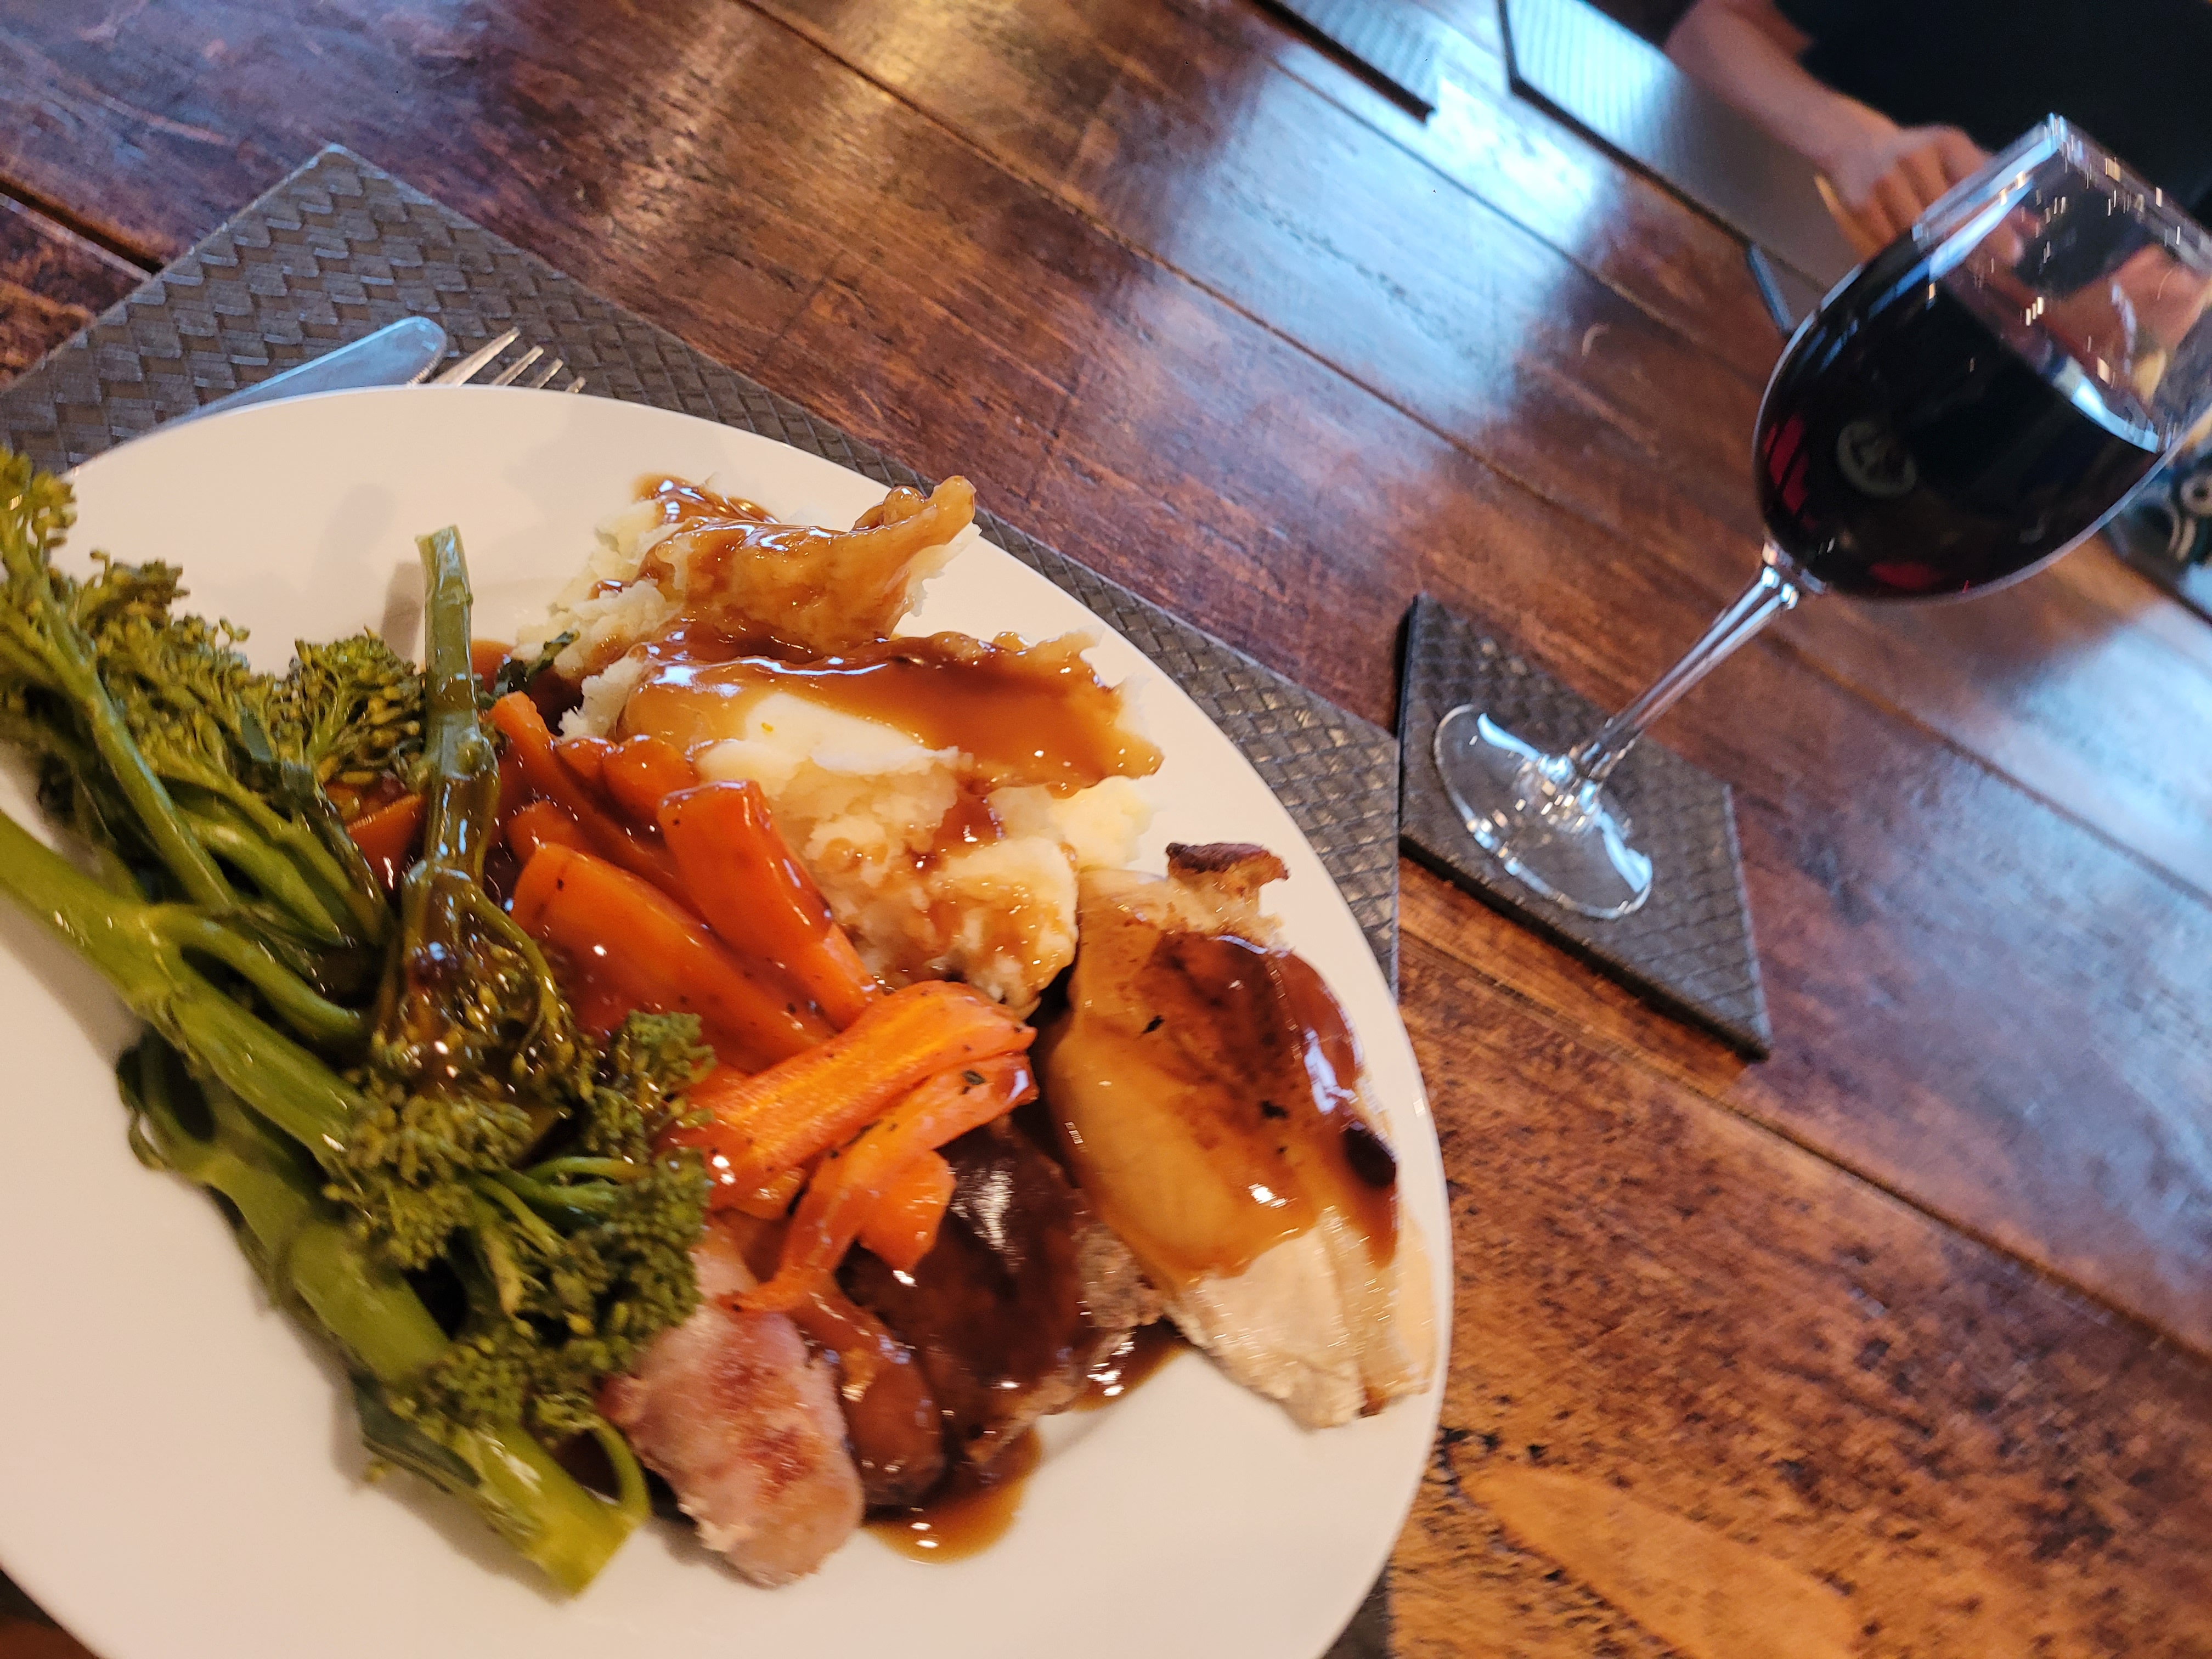 Chicken roast dinner and glass of red wine